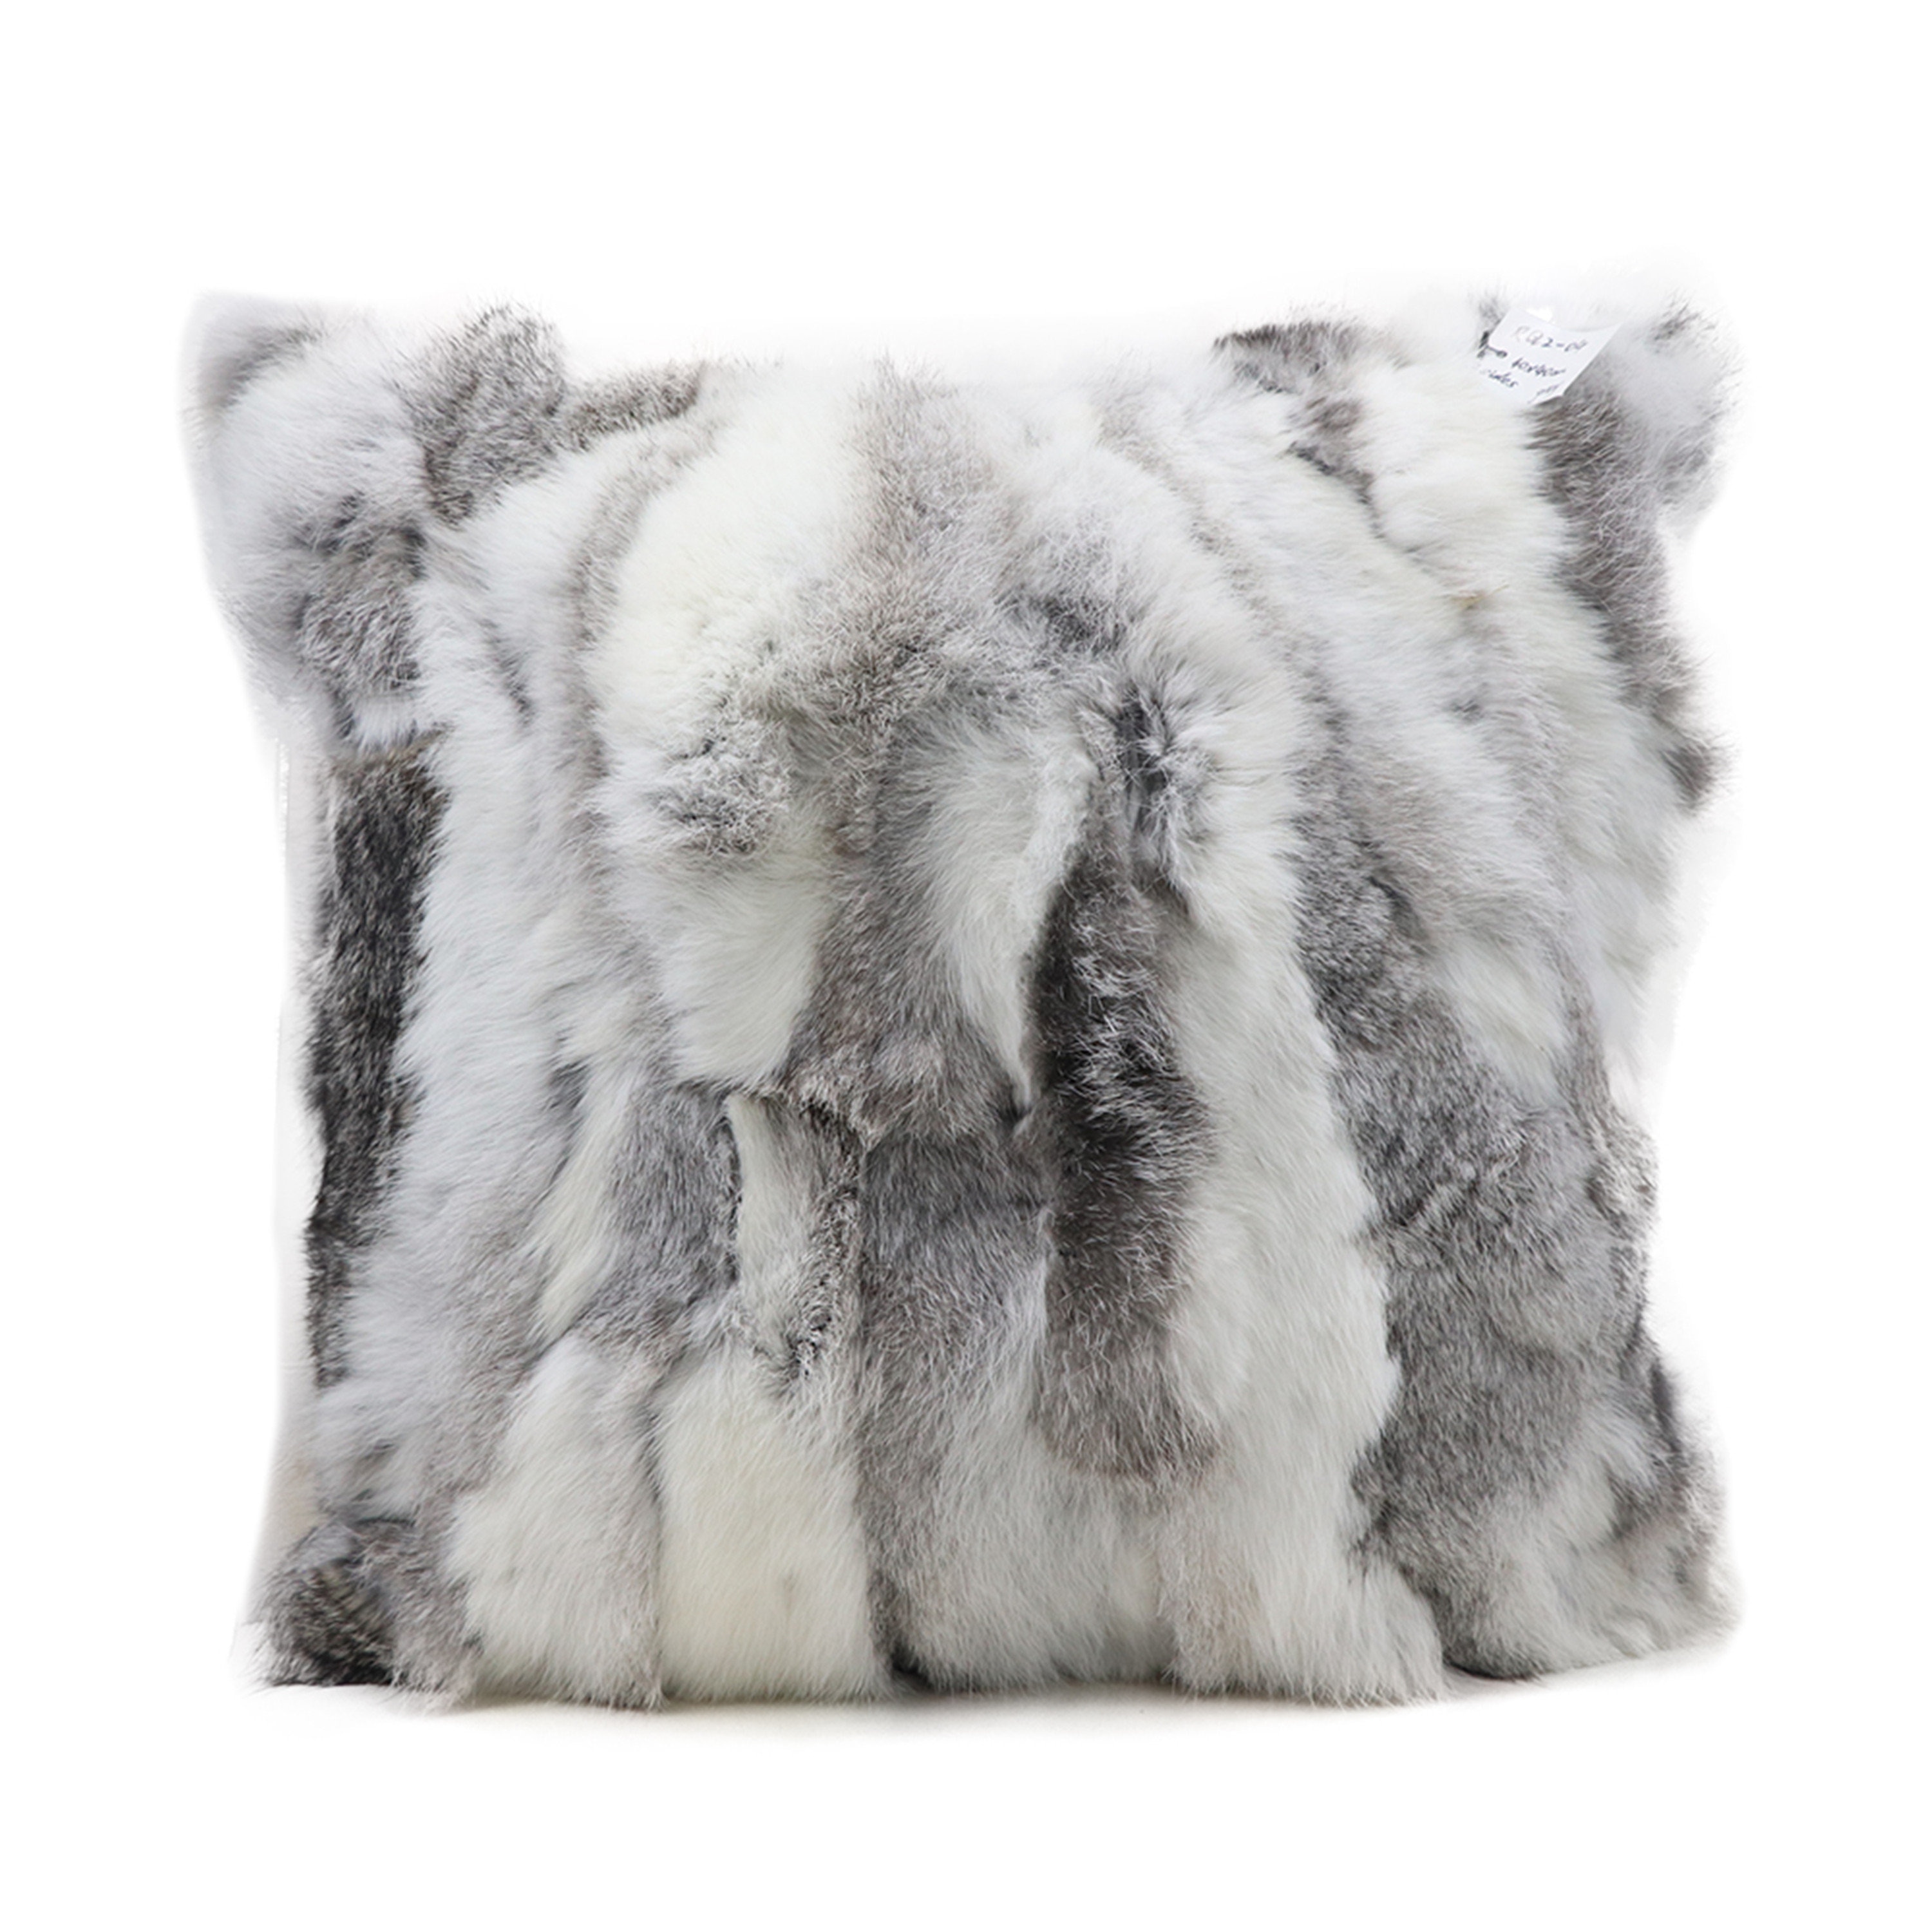  Wuuyuef Faux Fur Pillow Covers 24x24 inch Set of 2, Luxury  Super Fluffy Soft Rabbit Throw Pillow Covers,Washable Decorative Throw  Pillows for Couch Bed Bedroom Living Room,Black… : Home & Kitchen